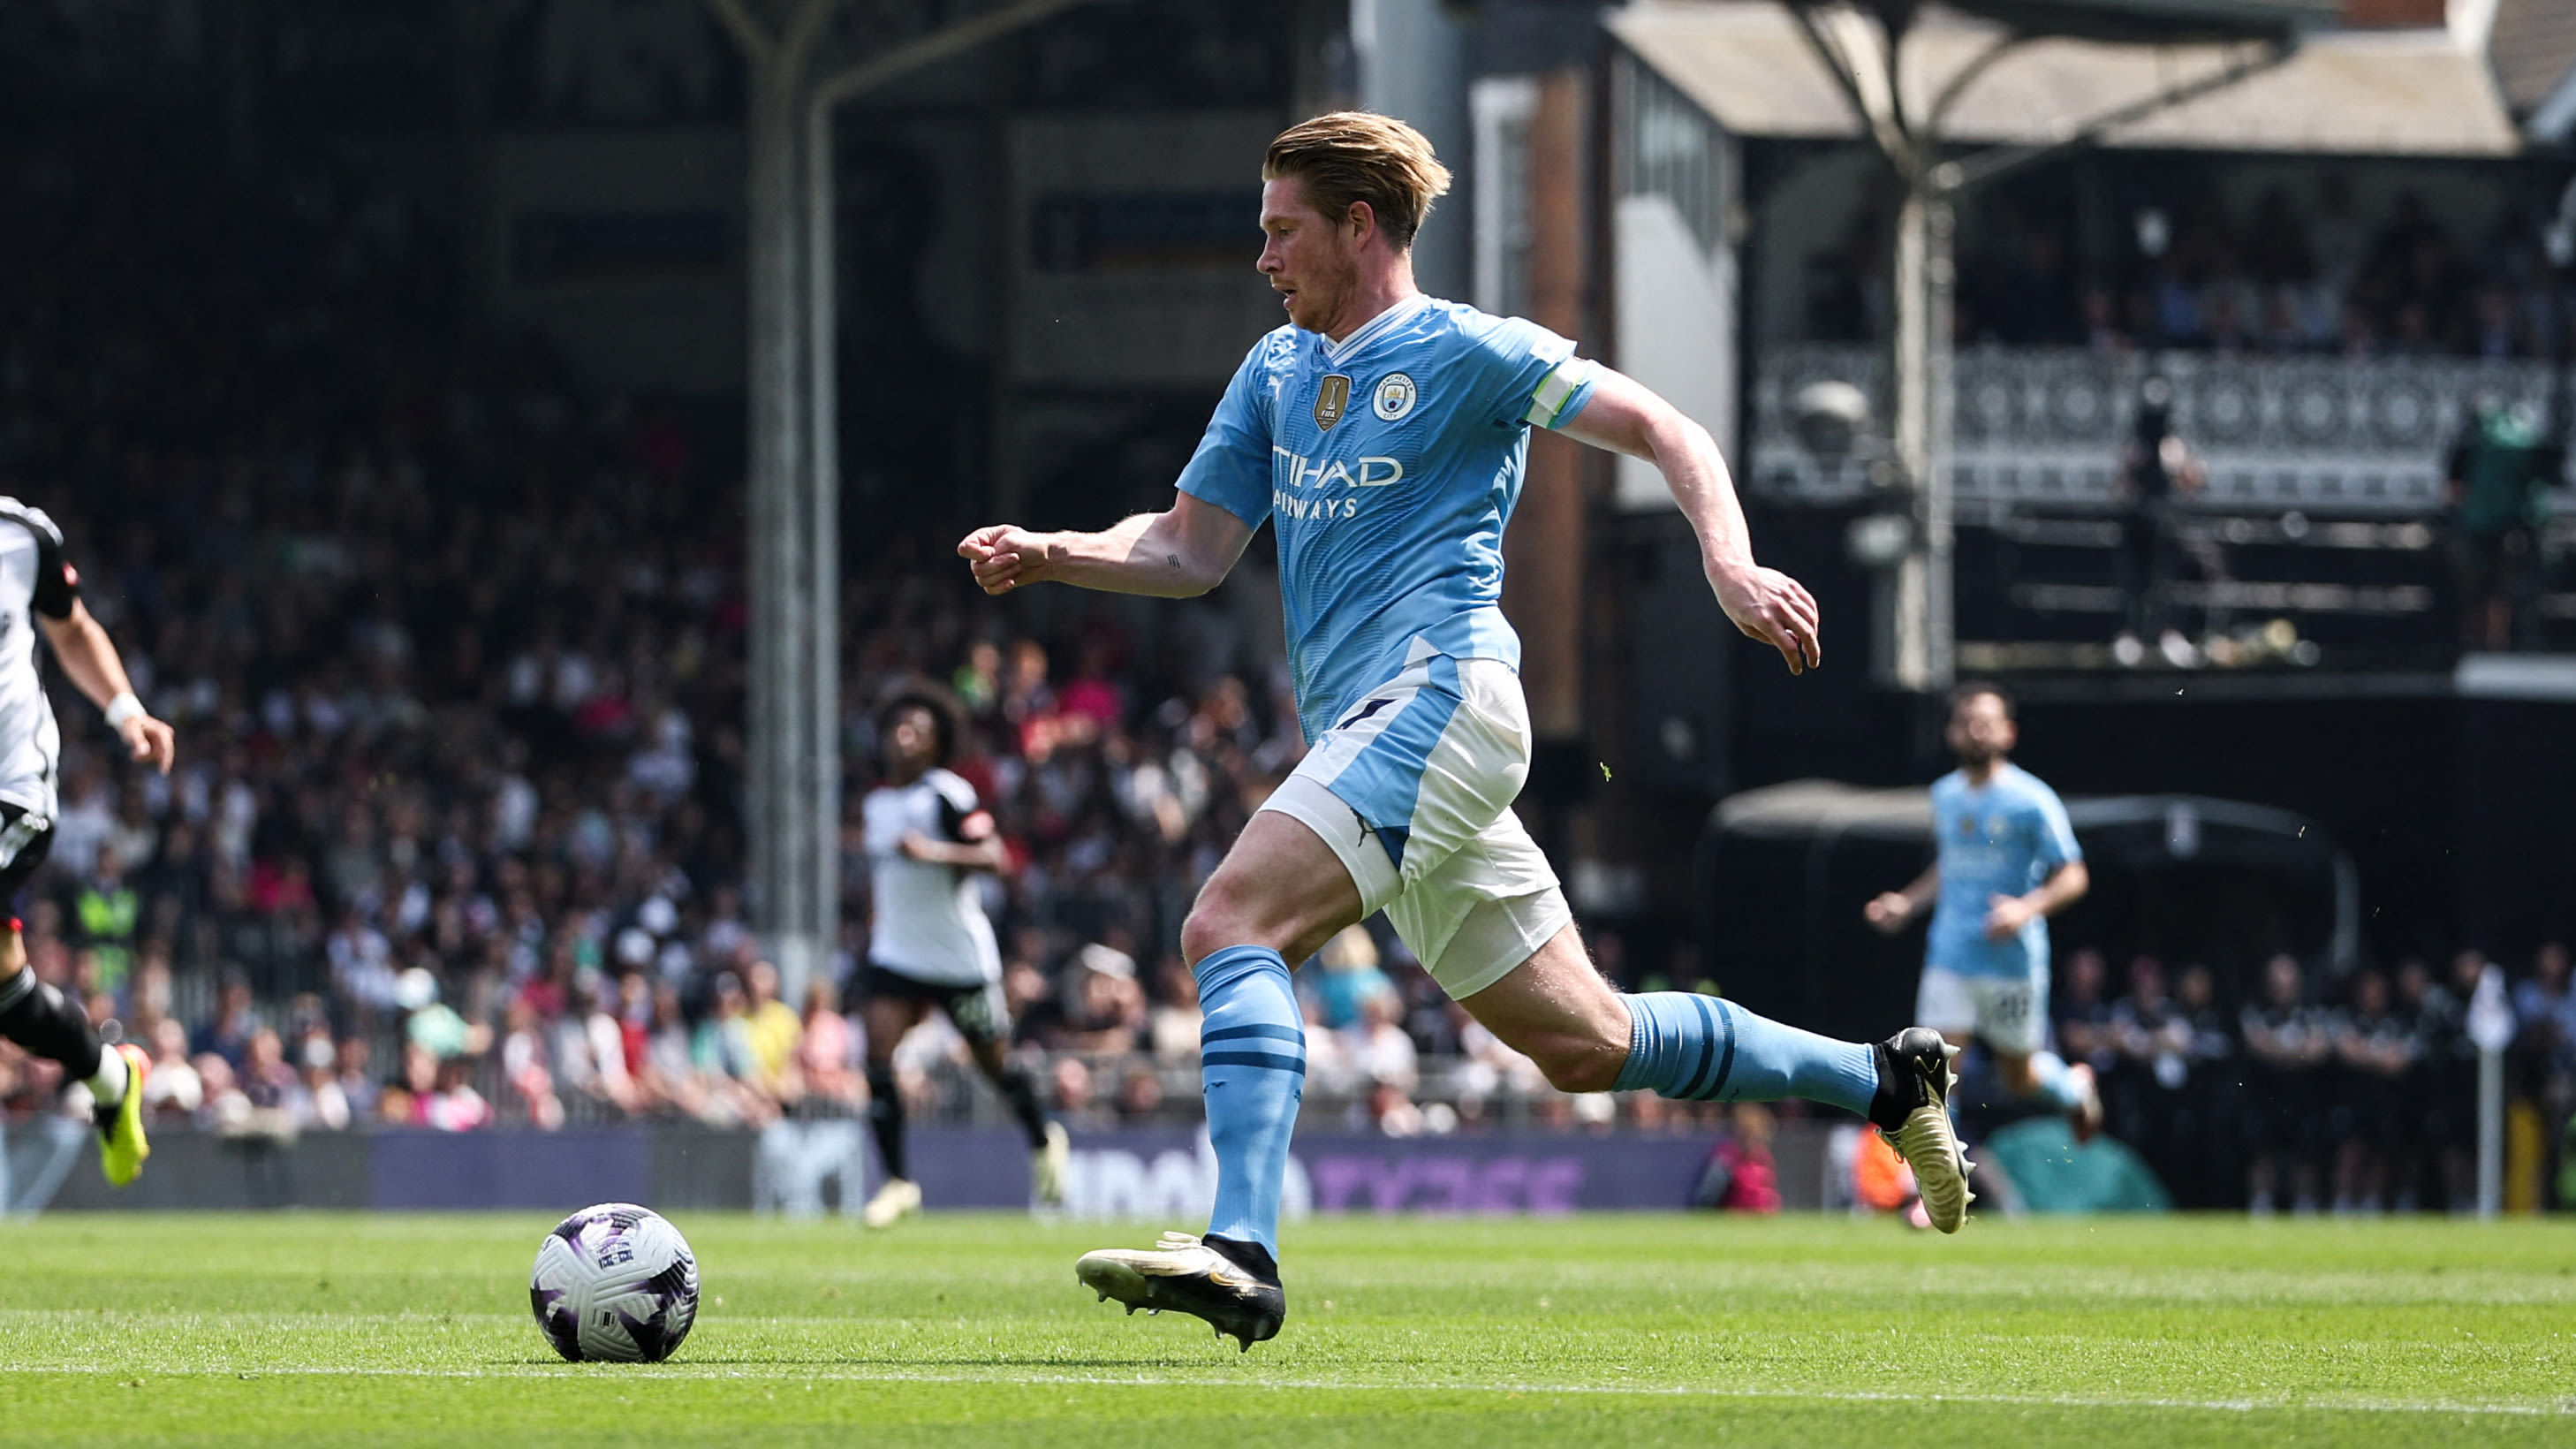 De Bruyne goes level with Fabregas in all-time assists rankings